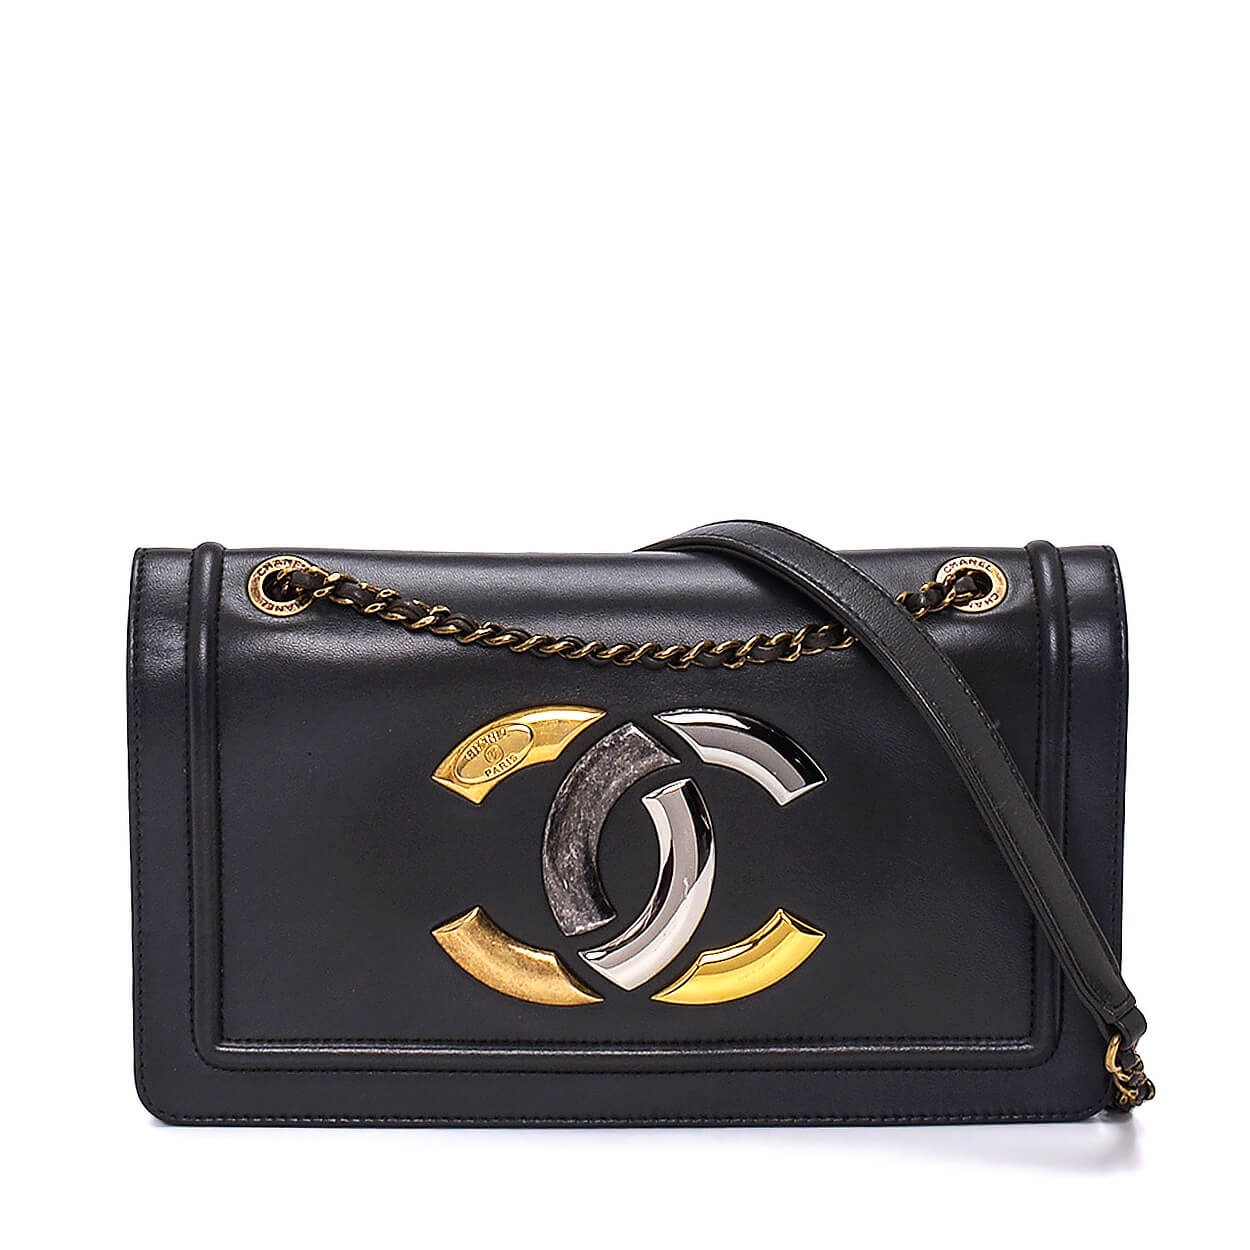 Chanel - Anthracite Leather Block Flap Bag